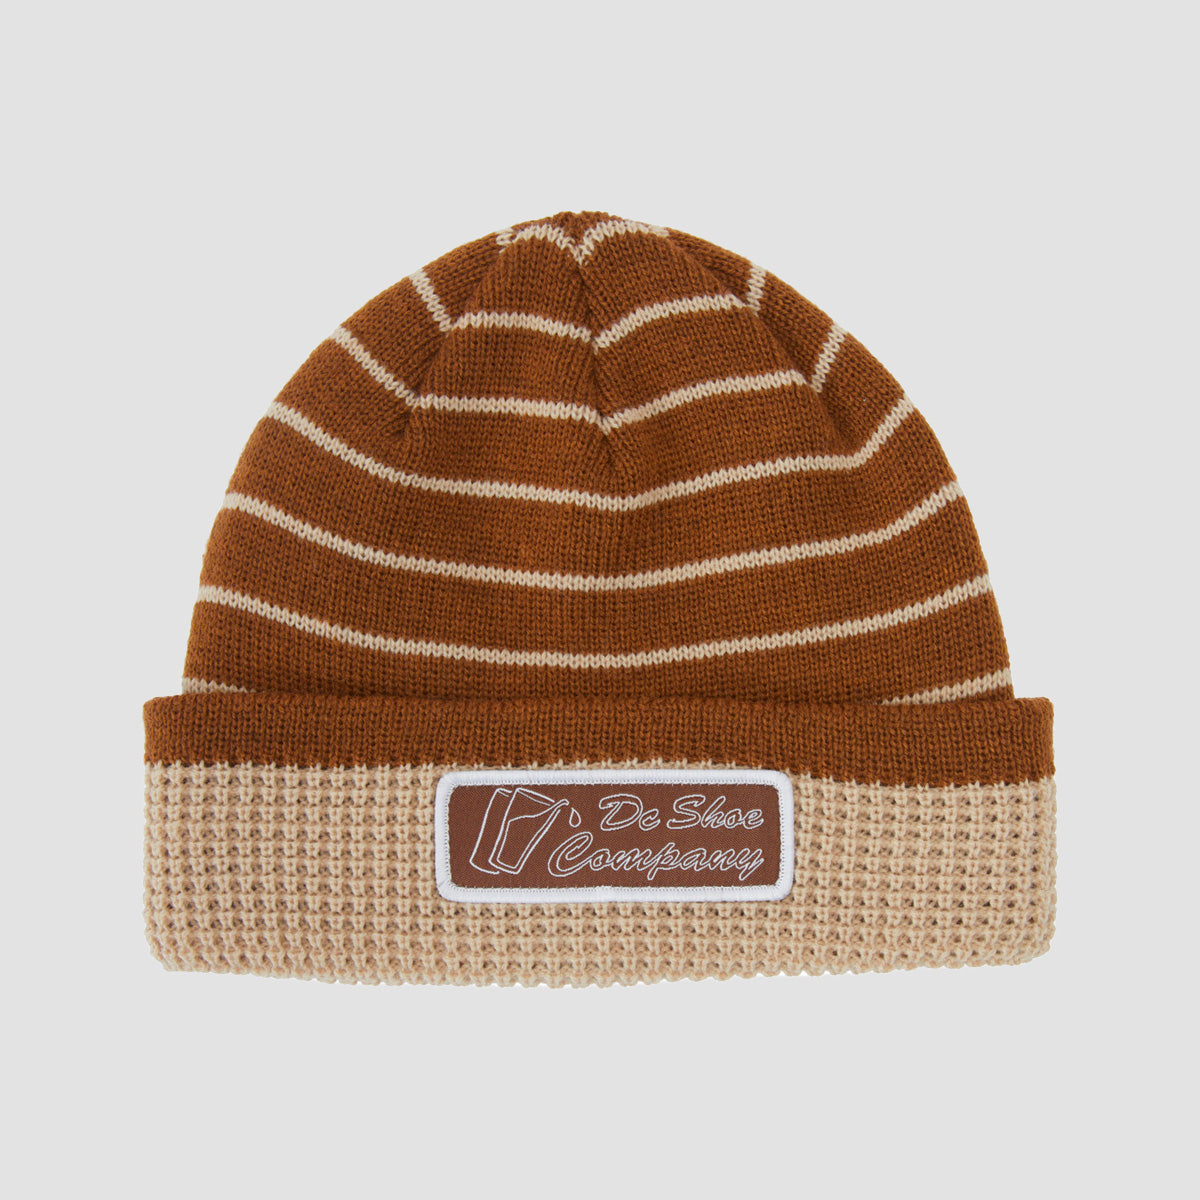 | 3 – Page Rollersnakes Beanies